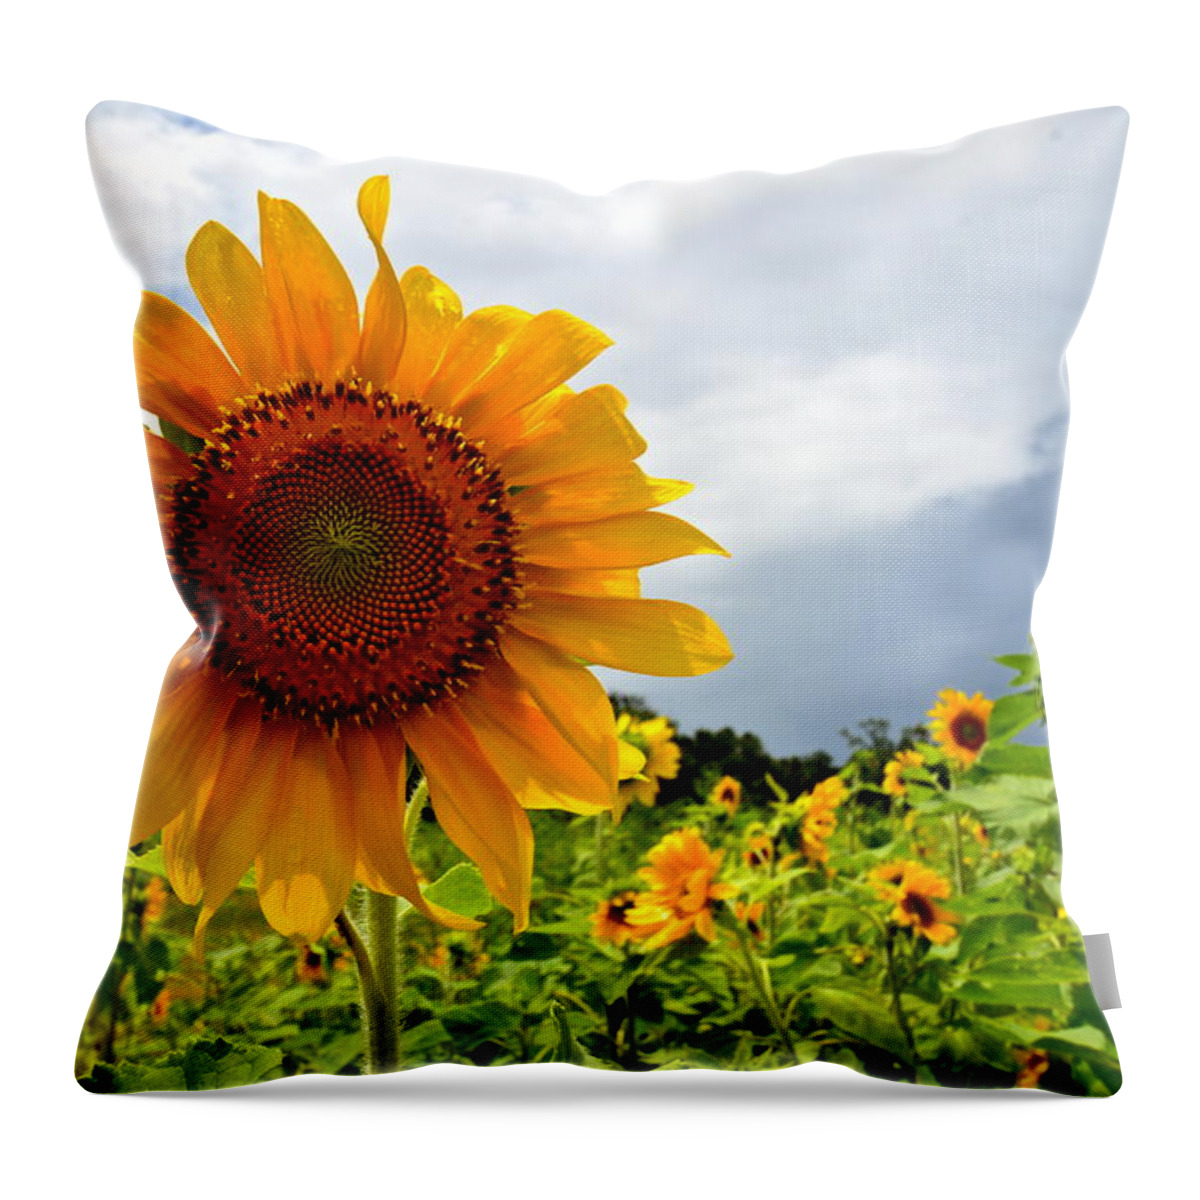 Landscape Throw Pillow featuring the Sunshine on a Cloudy Day by AnnaJo Vahle